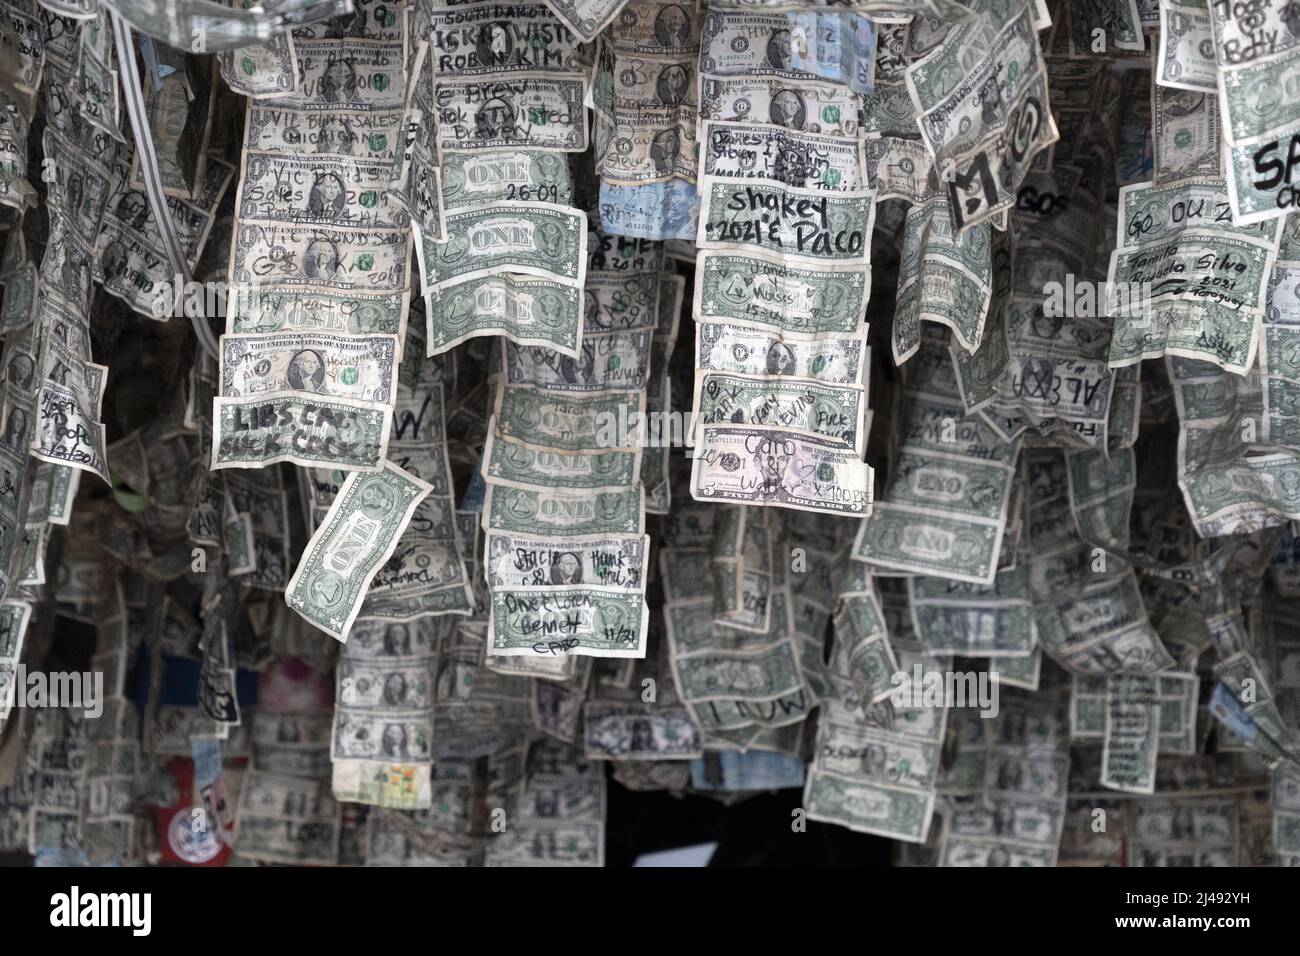 Many signed us dollars hanging from ceiling in mexican baja california bar Stock Photo